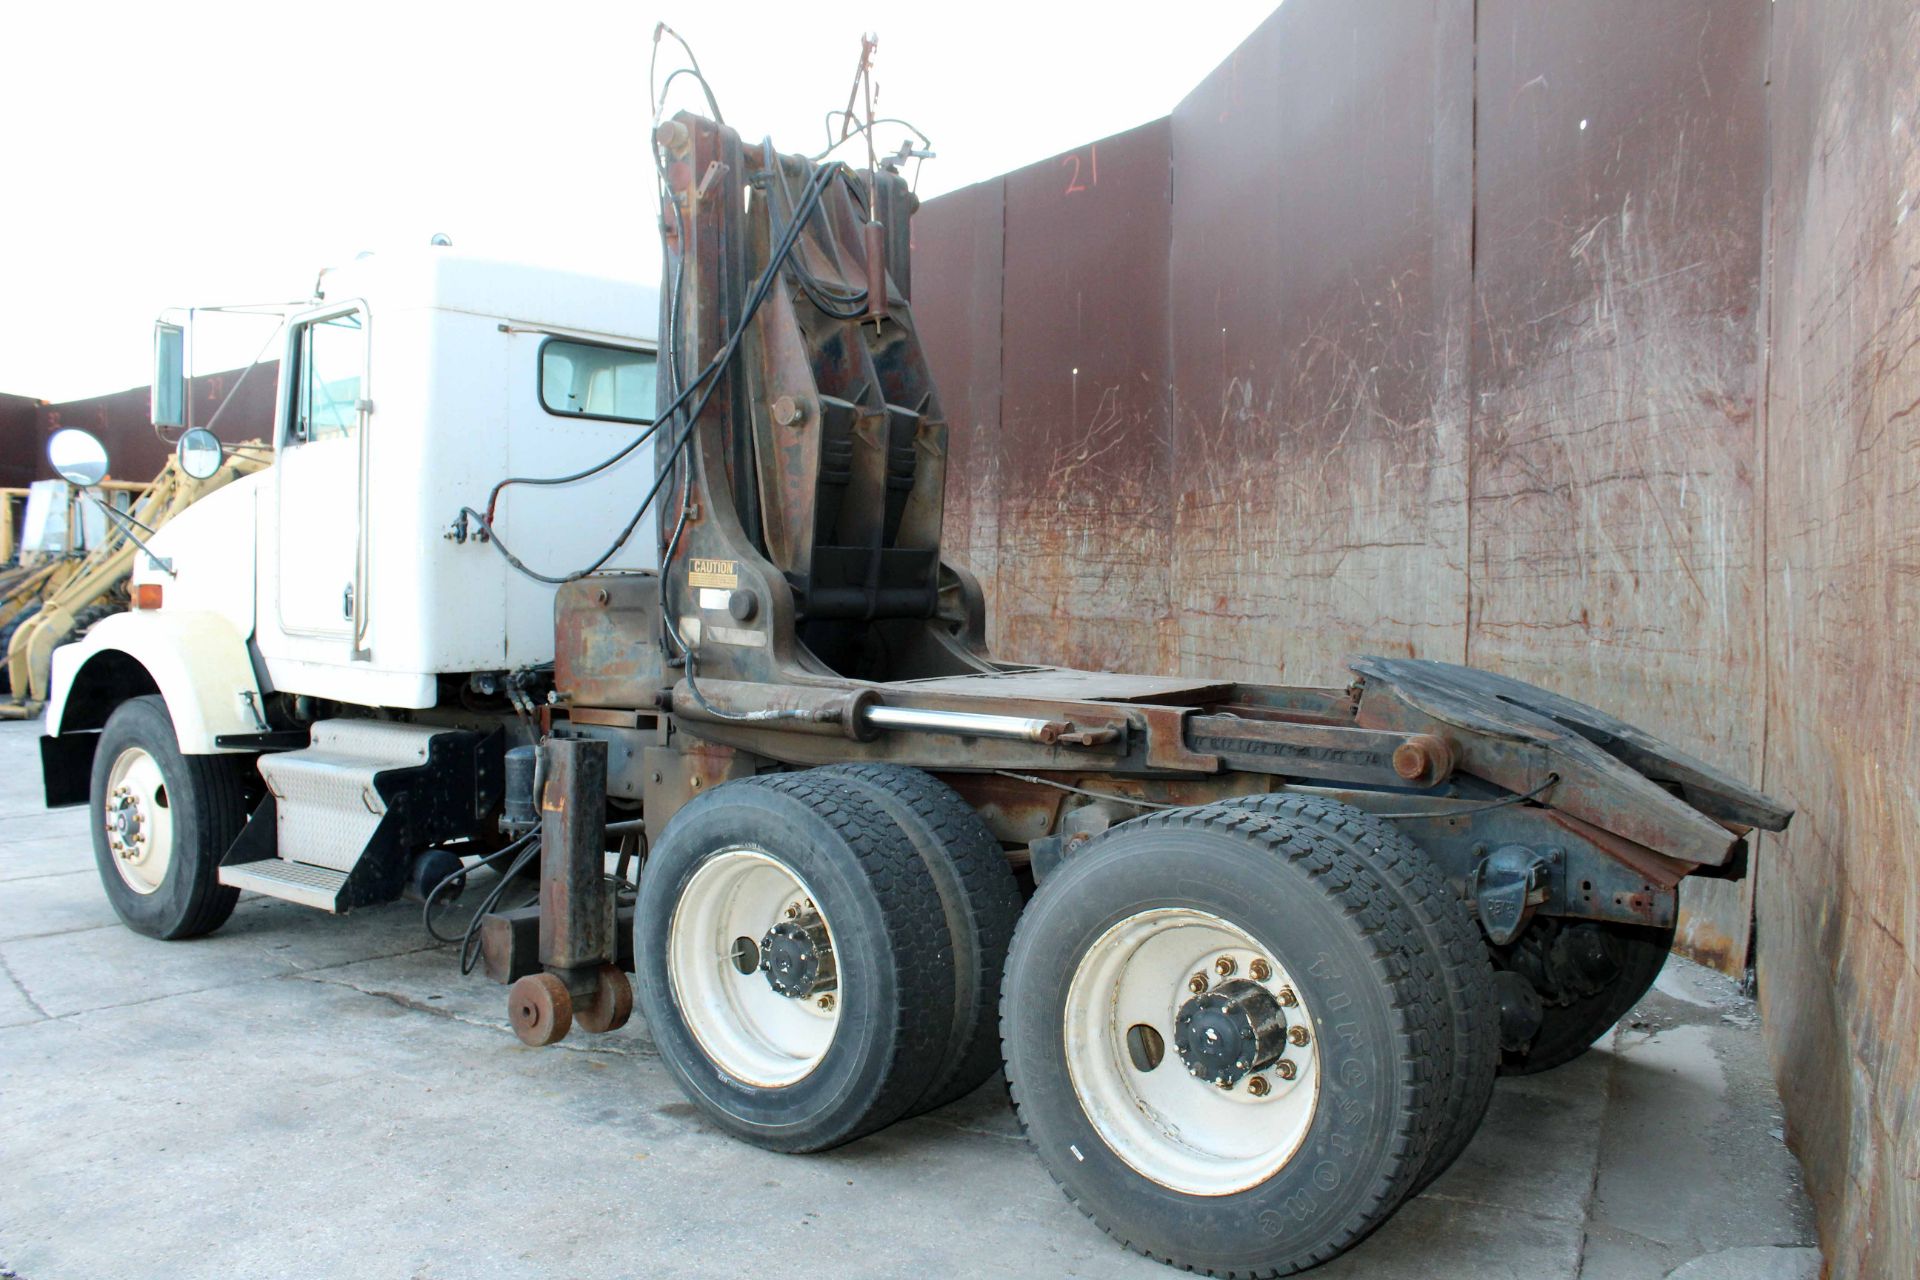 TILT LIFT TRACTOR, KENWORTH, new 1988, Odo: 740,000 miles, Chassis No. M515122 - Image 2 of 7